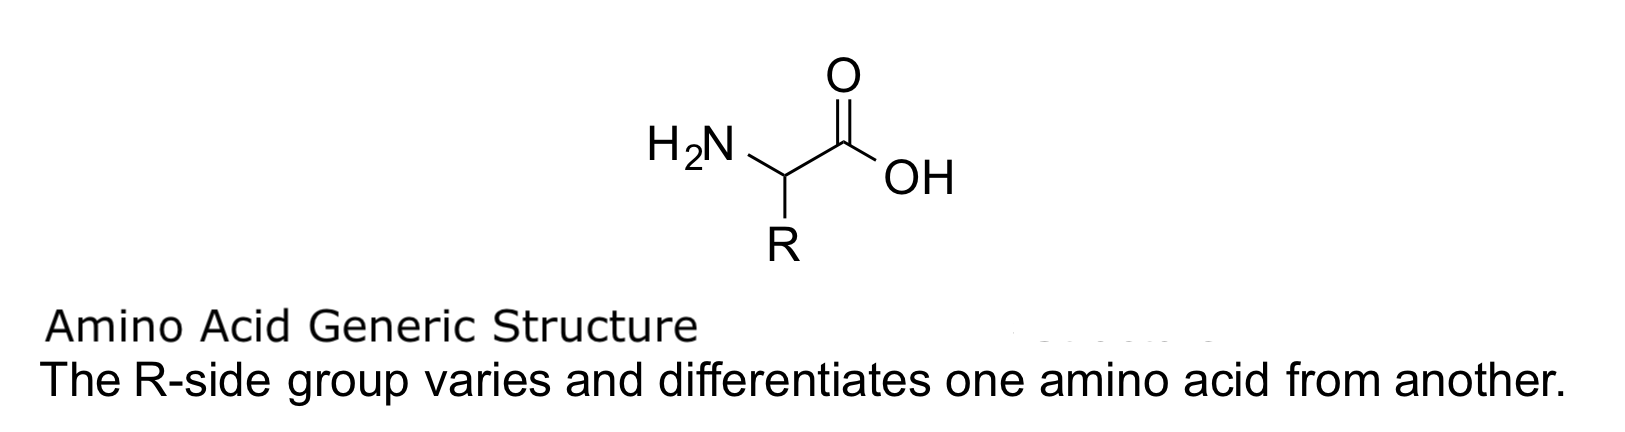 <p>Amino Acid Generic Structure. The R-group varies and differentiates one amino acid from another.</p>